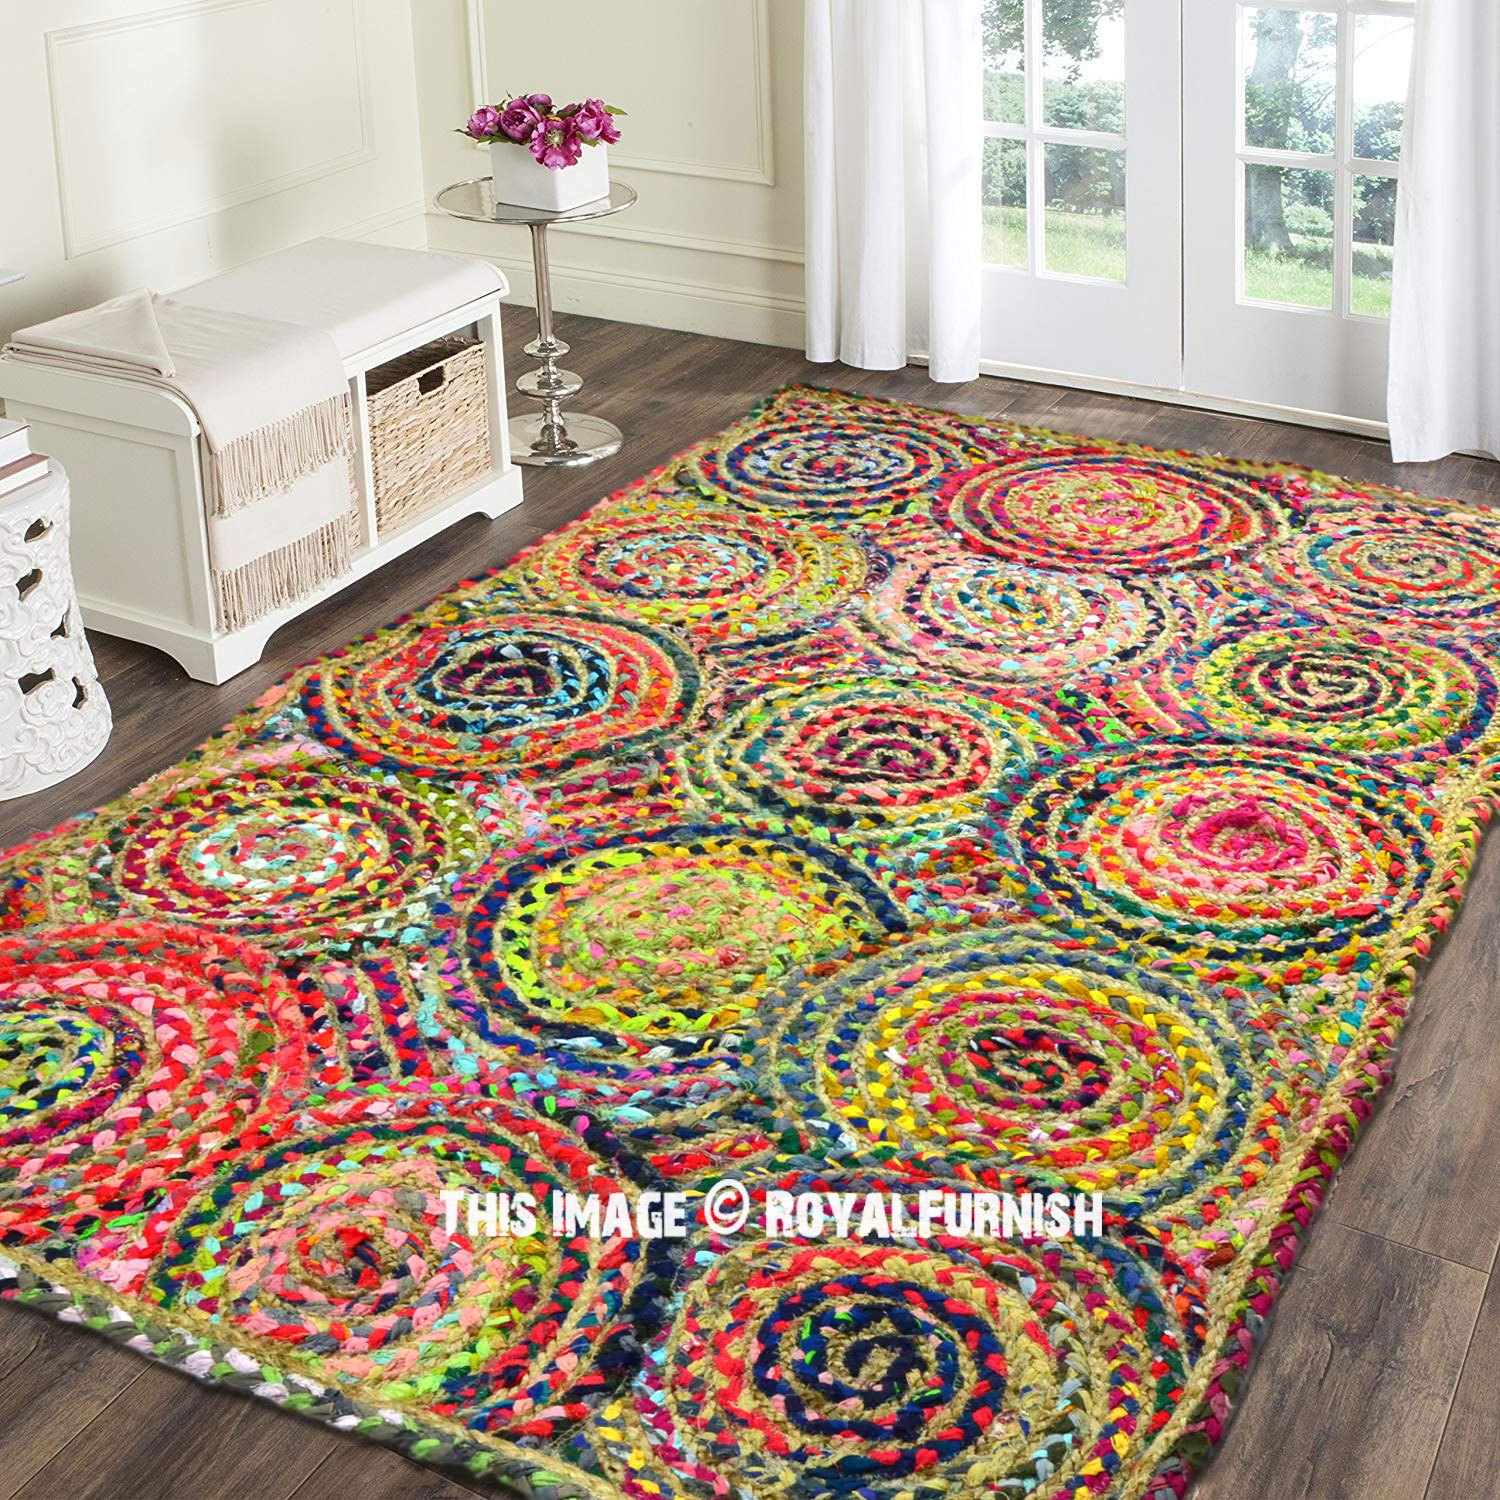 Indian Cotton 3X5 Feet Rectangle Colorful Cotton Home Jute Rug